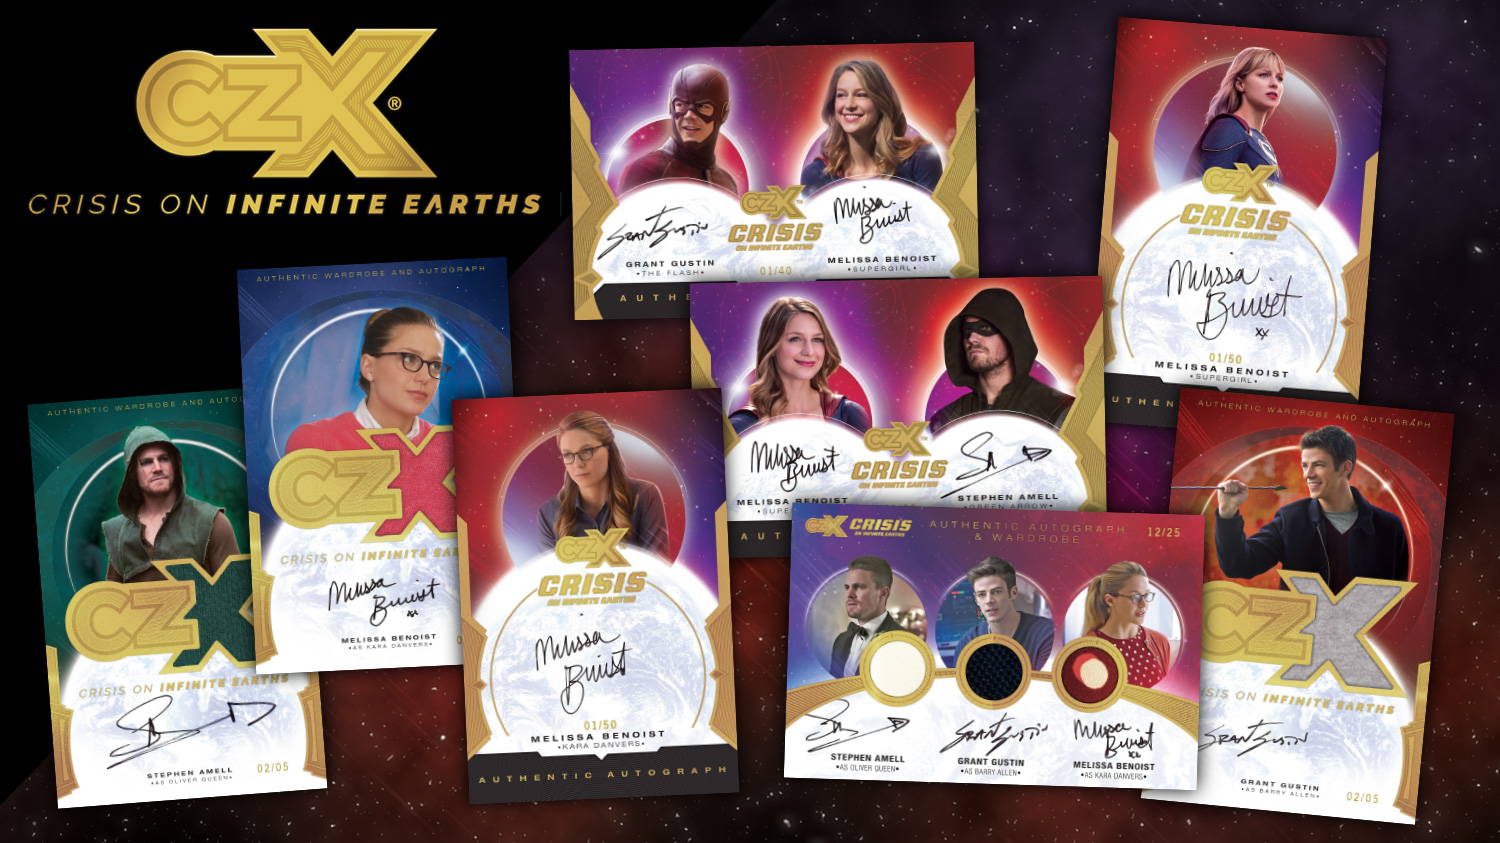 CZX Crisis on Infinite Earths:  Oversized Autograph and Autograph-Wardrobe Cards (eBay Exclusives) – Drop 5